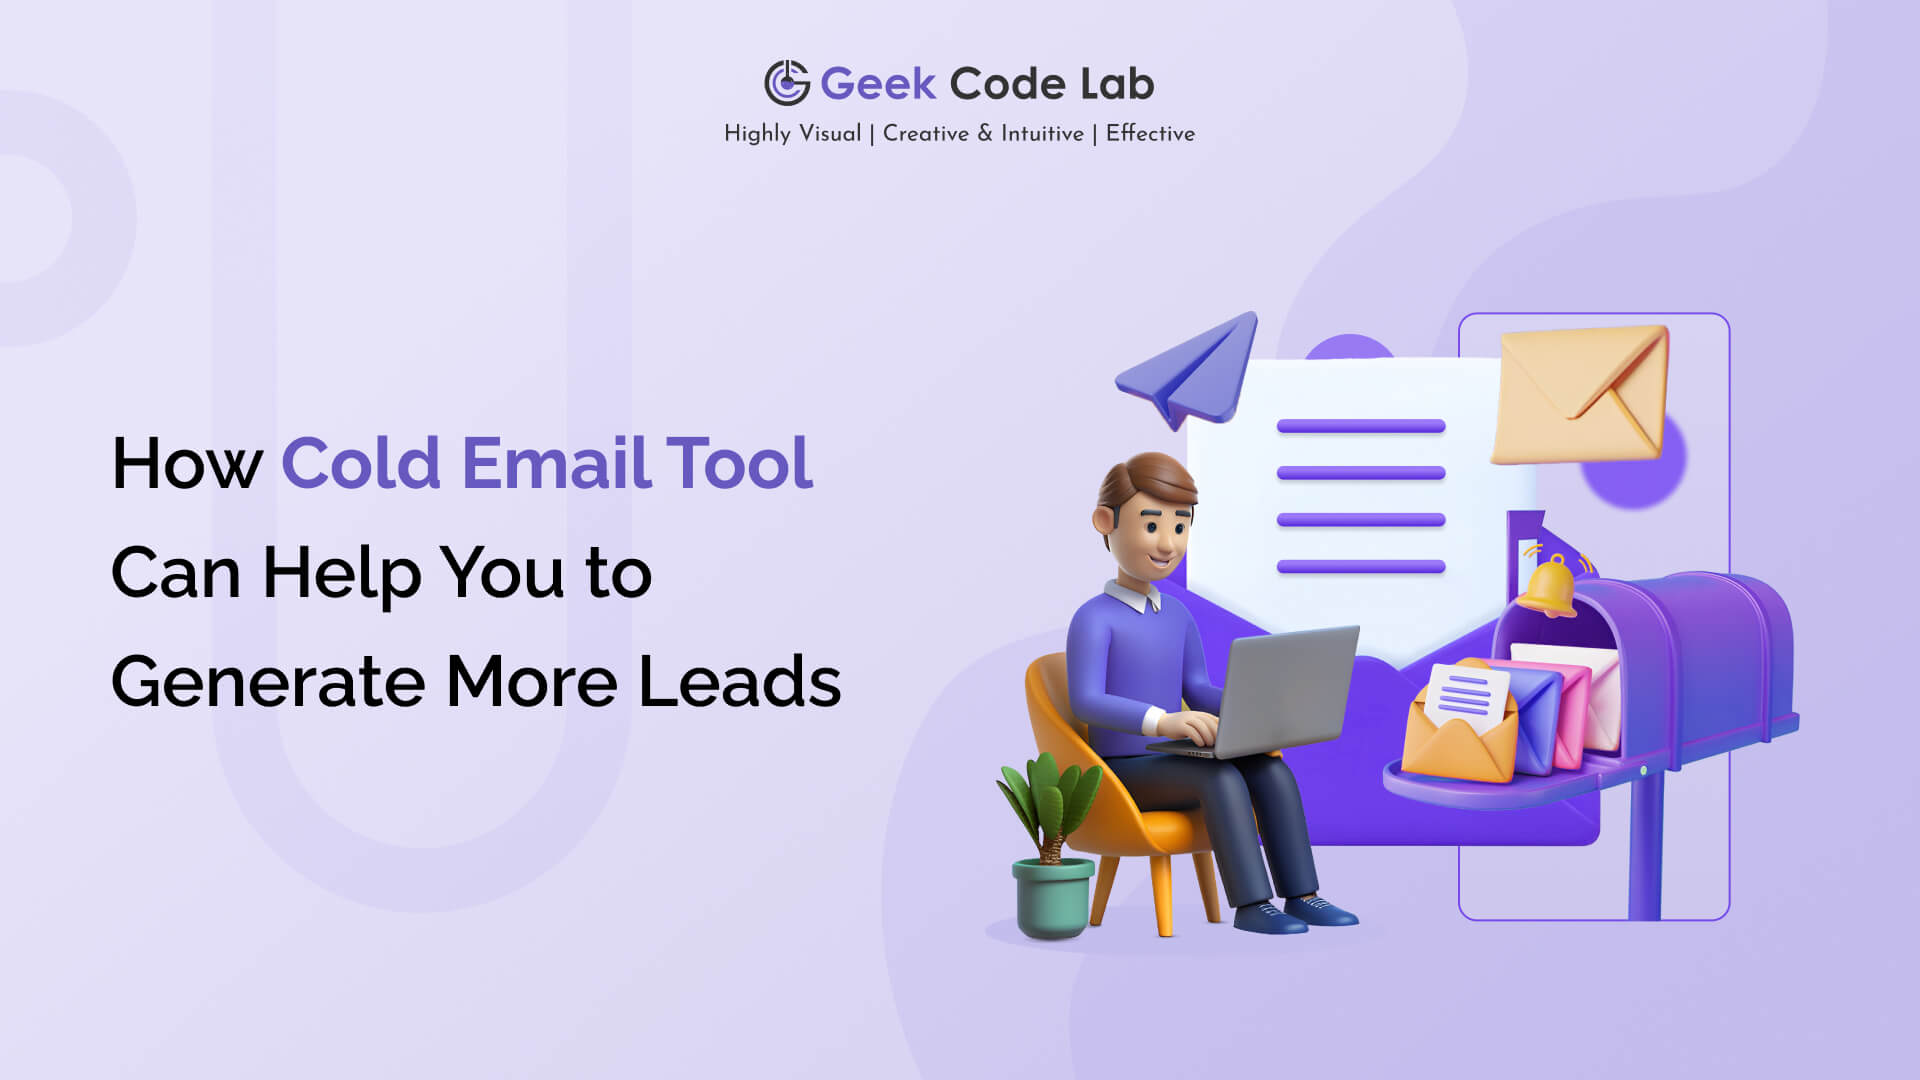 How Cold Email Tool Can Help You Generate More Leads